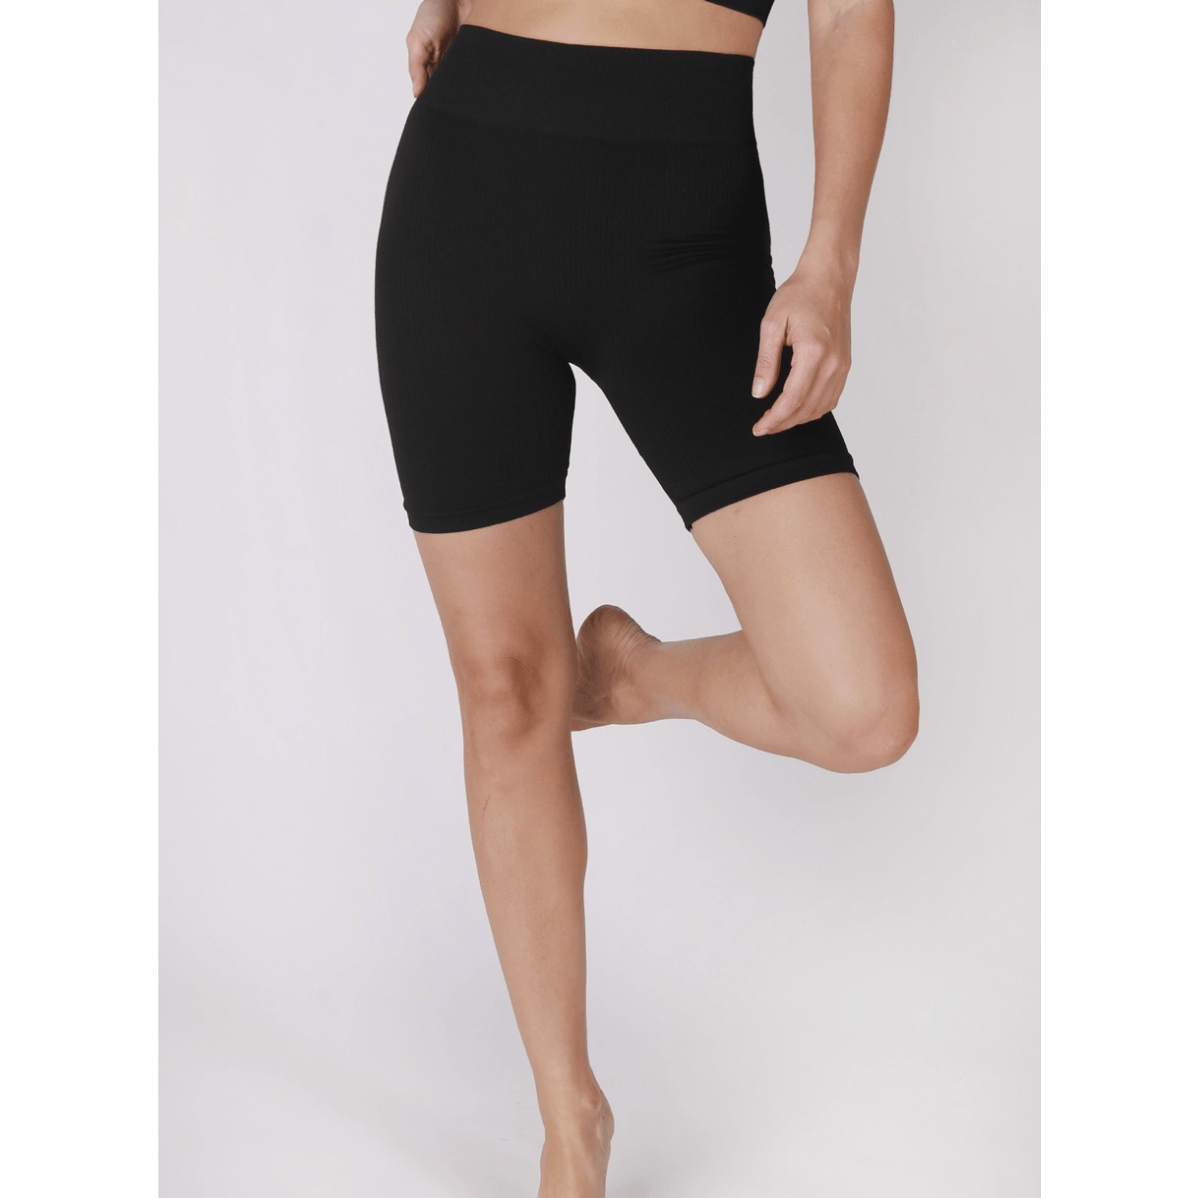 Ribbed Highwaist Shorts- Black - Intrigue Ink Visit Bozeman, Unique Shopping Boutique in Montana, Work from Home Clothes for Women